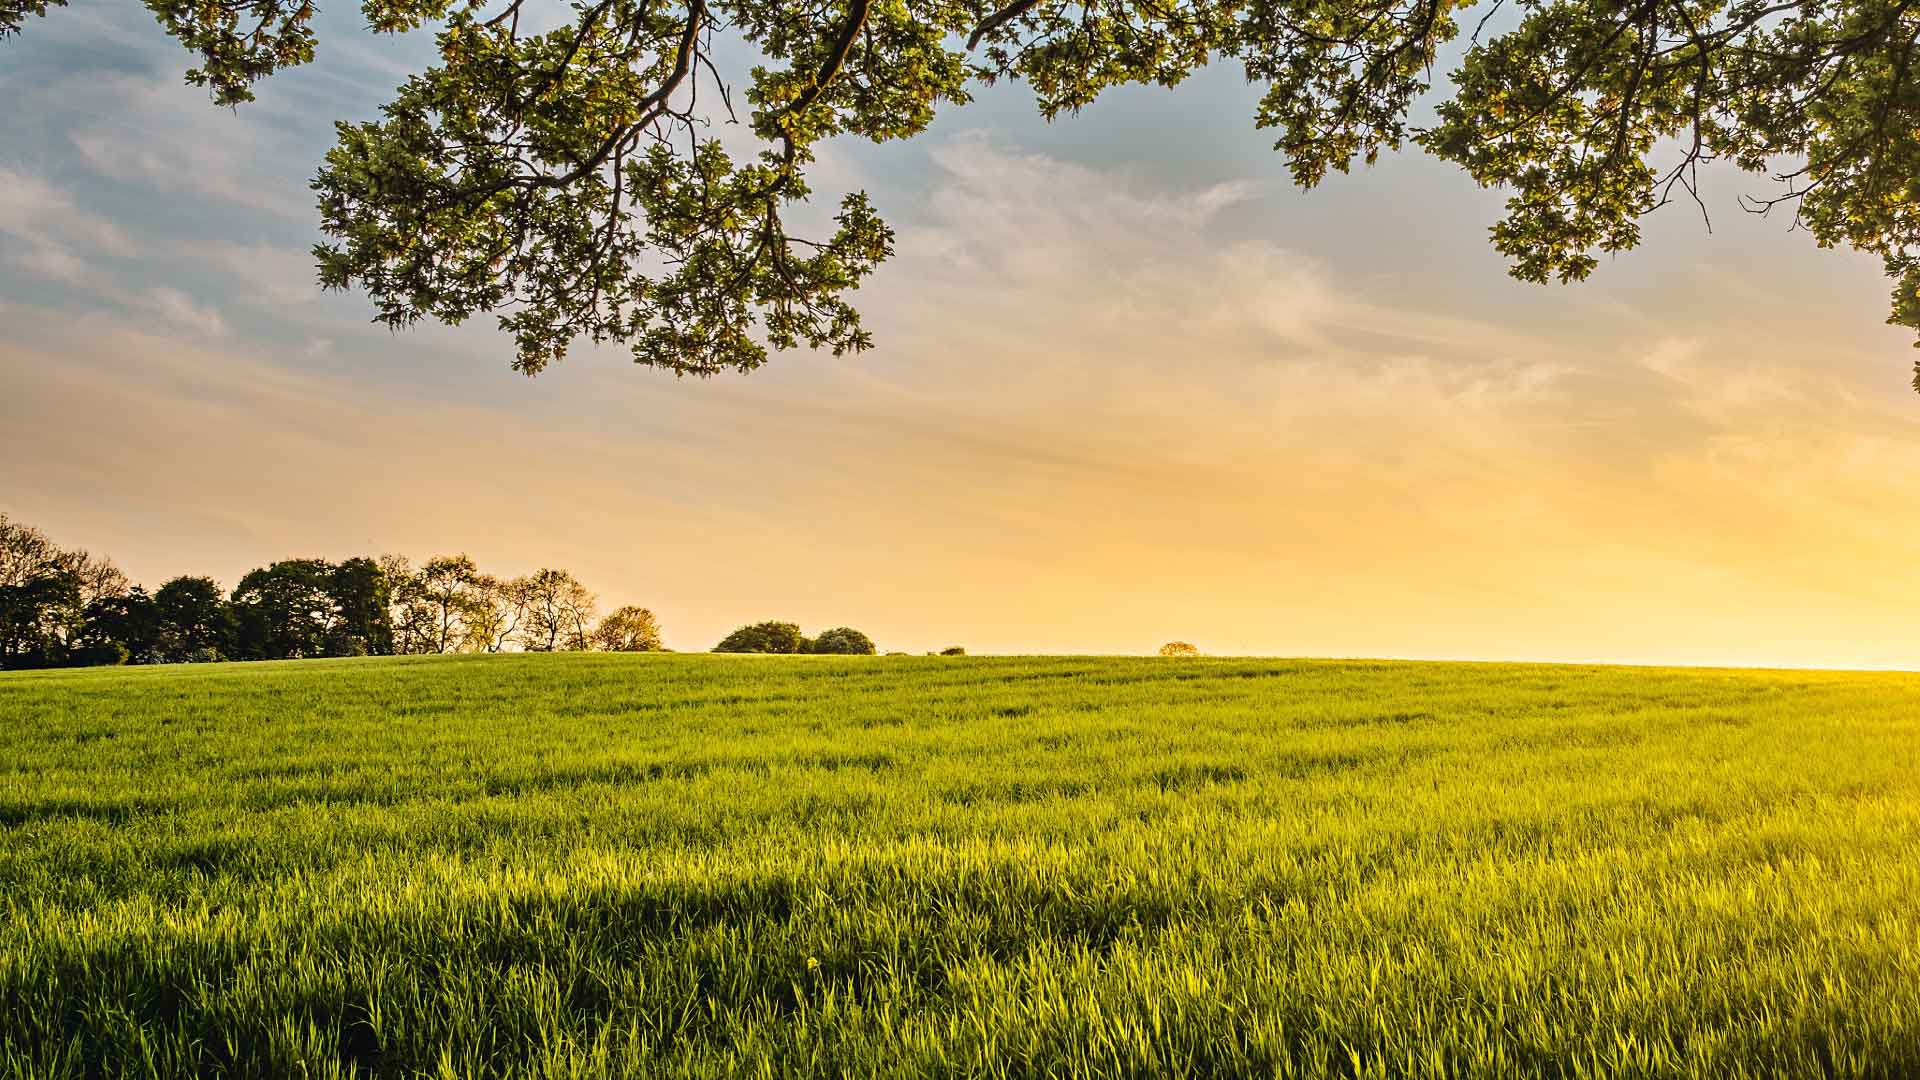 Photo of a field with a sunset in the distance. There's a tree branch overhead near the photography, and a partial treeline on the left in the distance. The field is bright green grass, and the sky is rich yellow, orange, and blue hues. Credit Benjamin Davies.